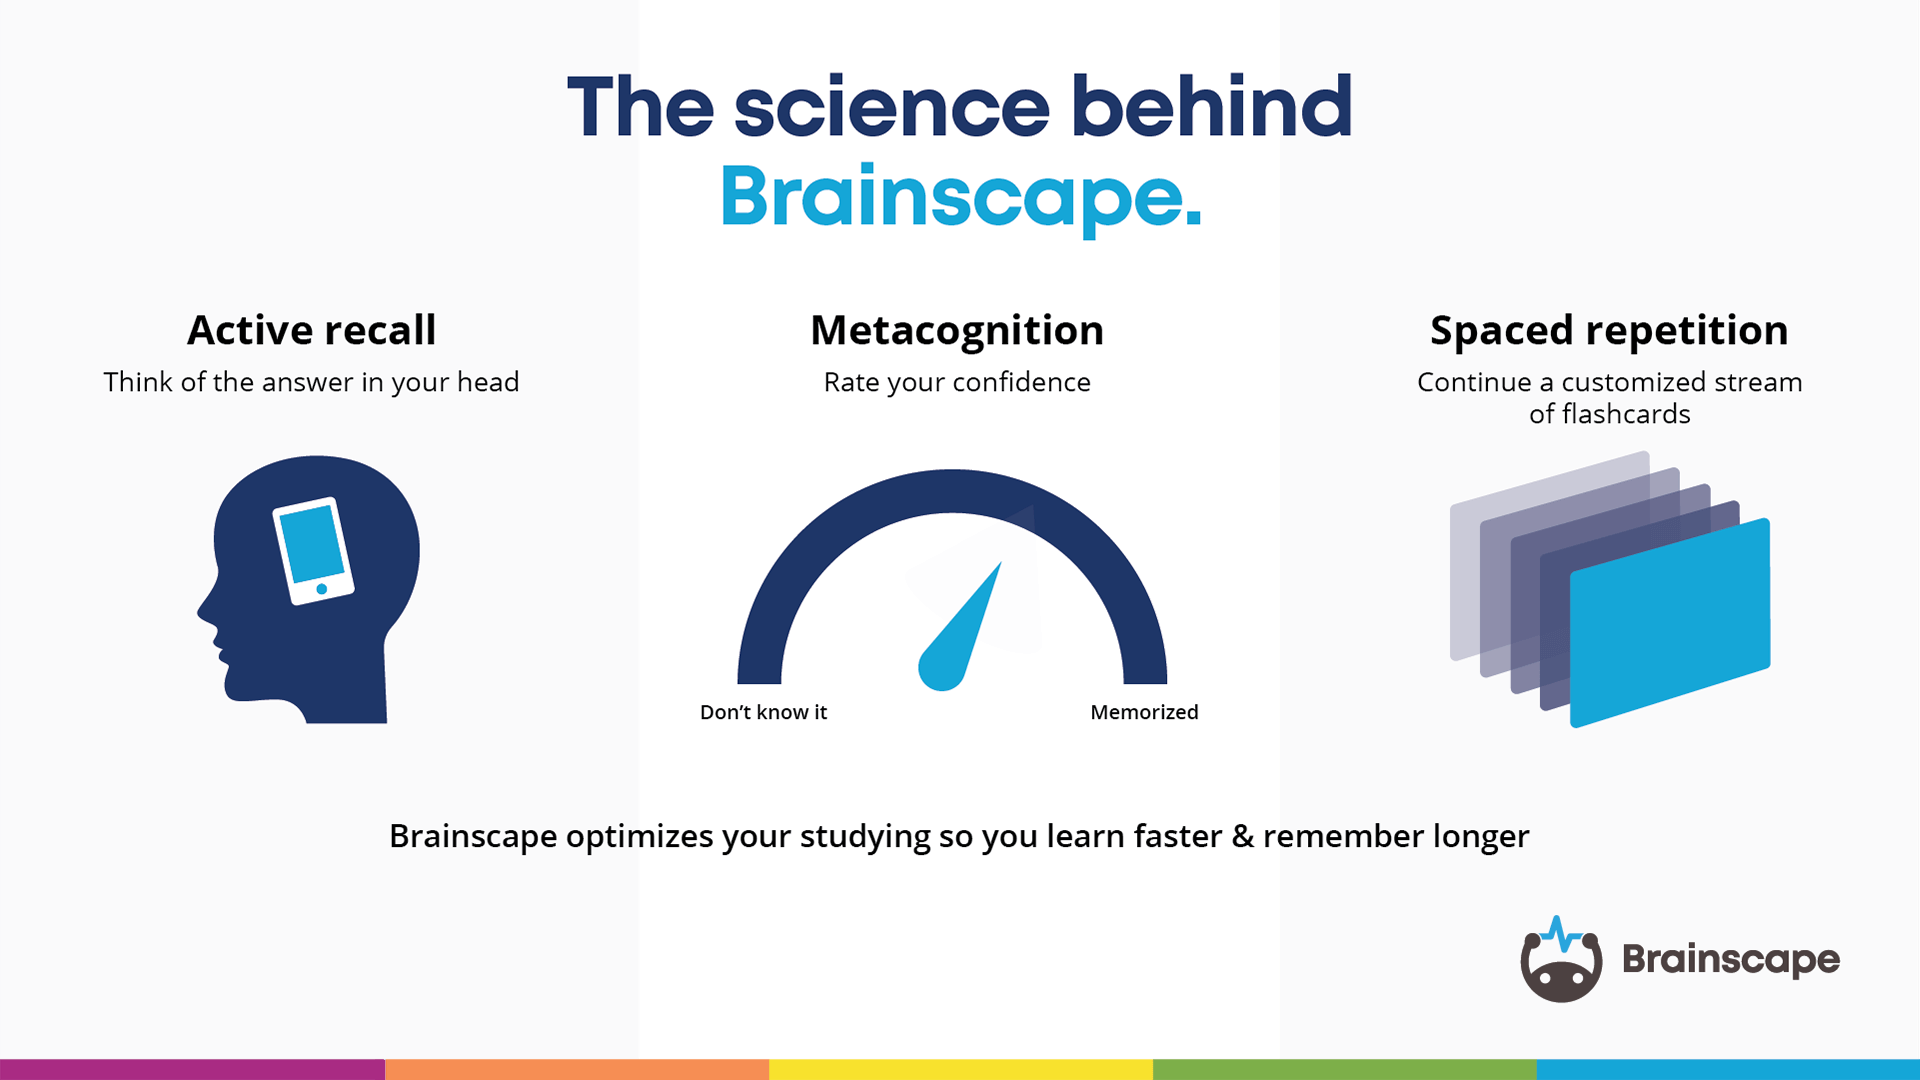 The science behind Braincscape graphic